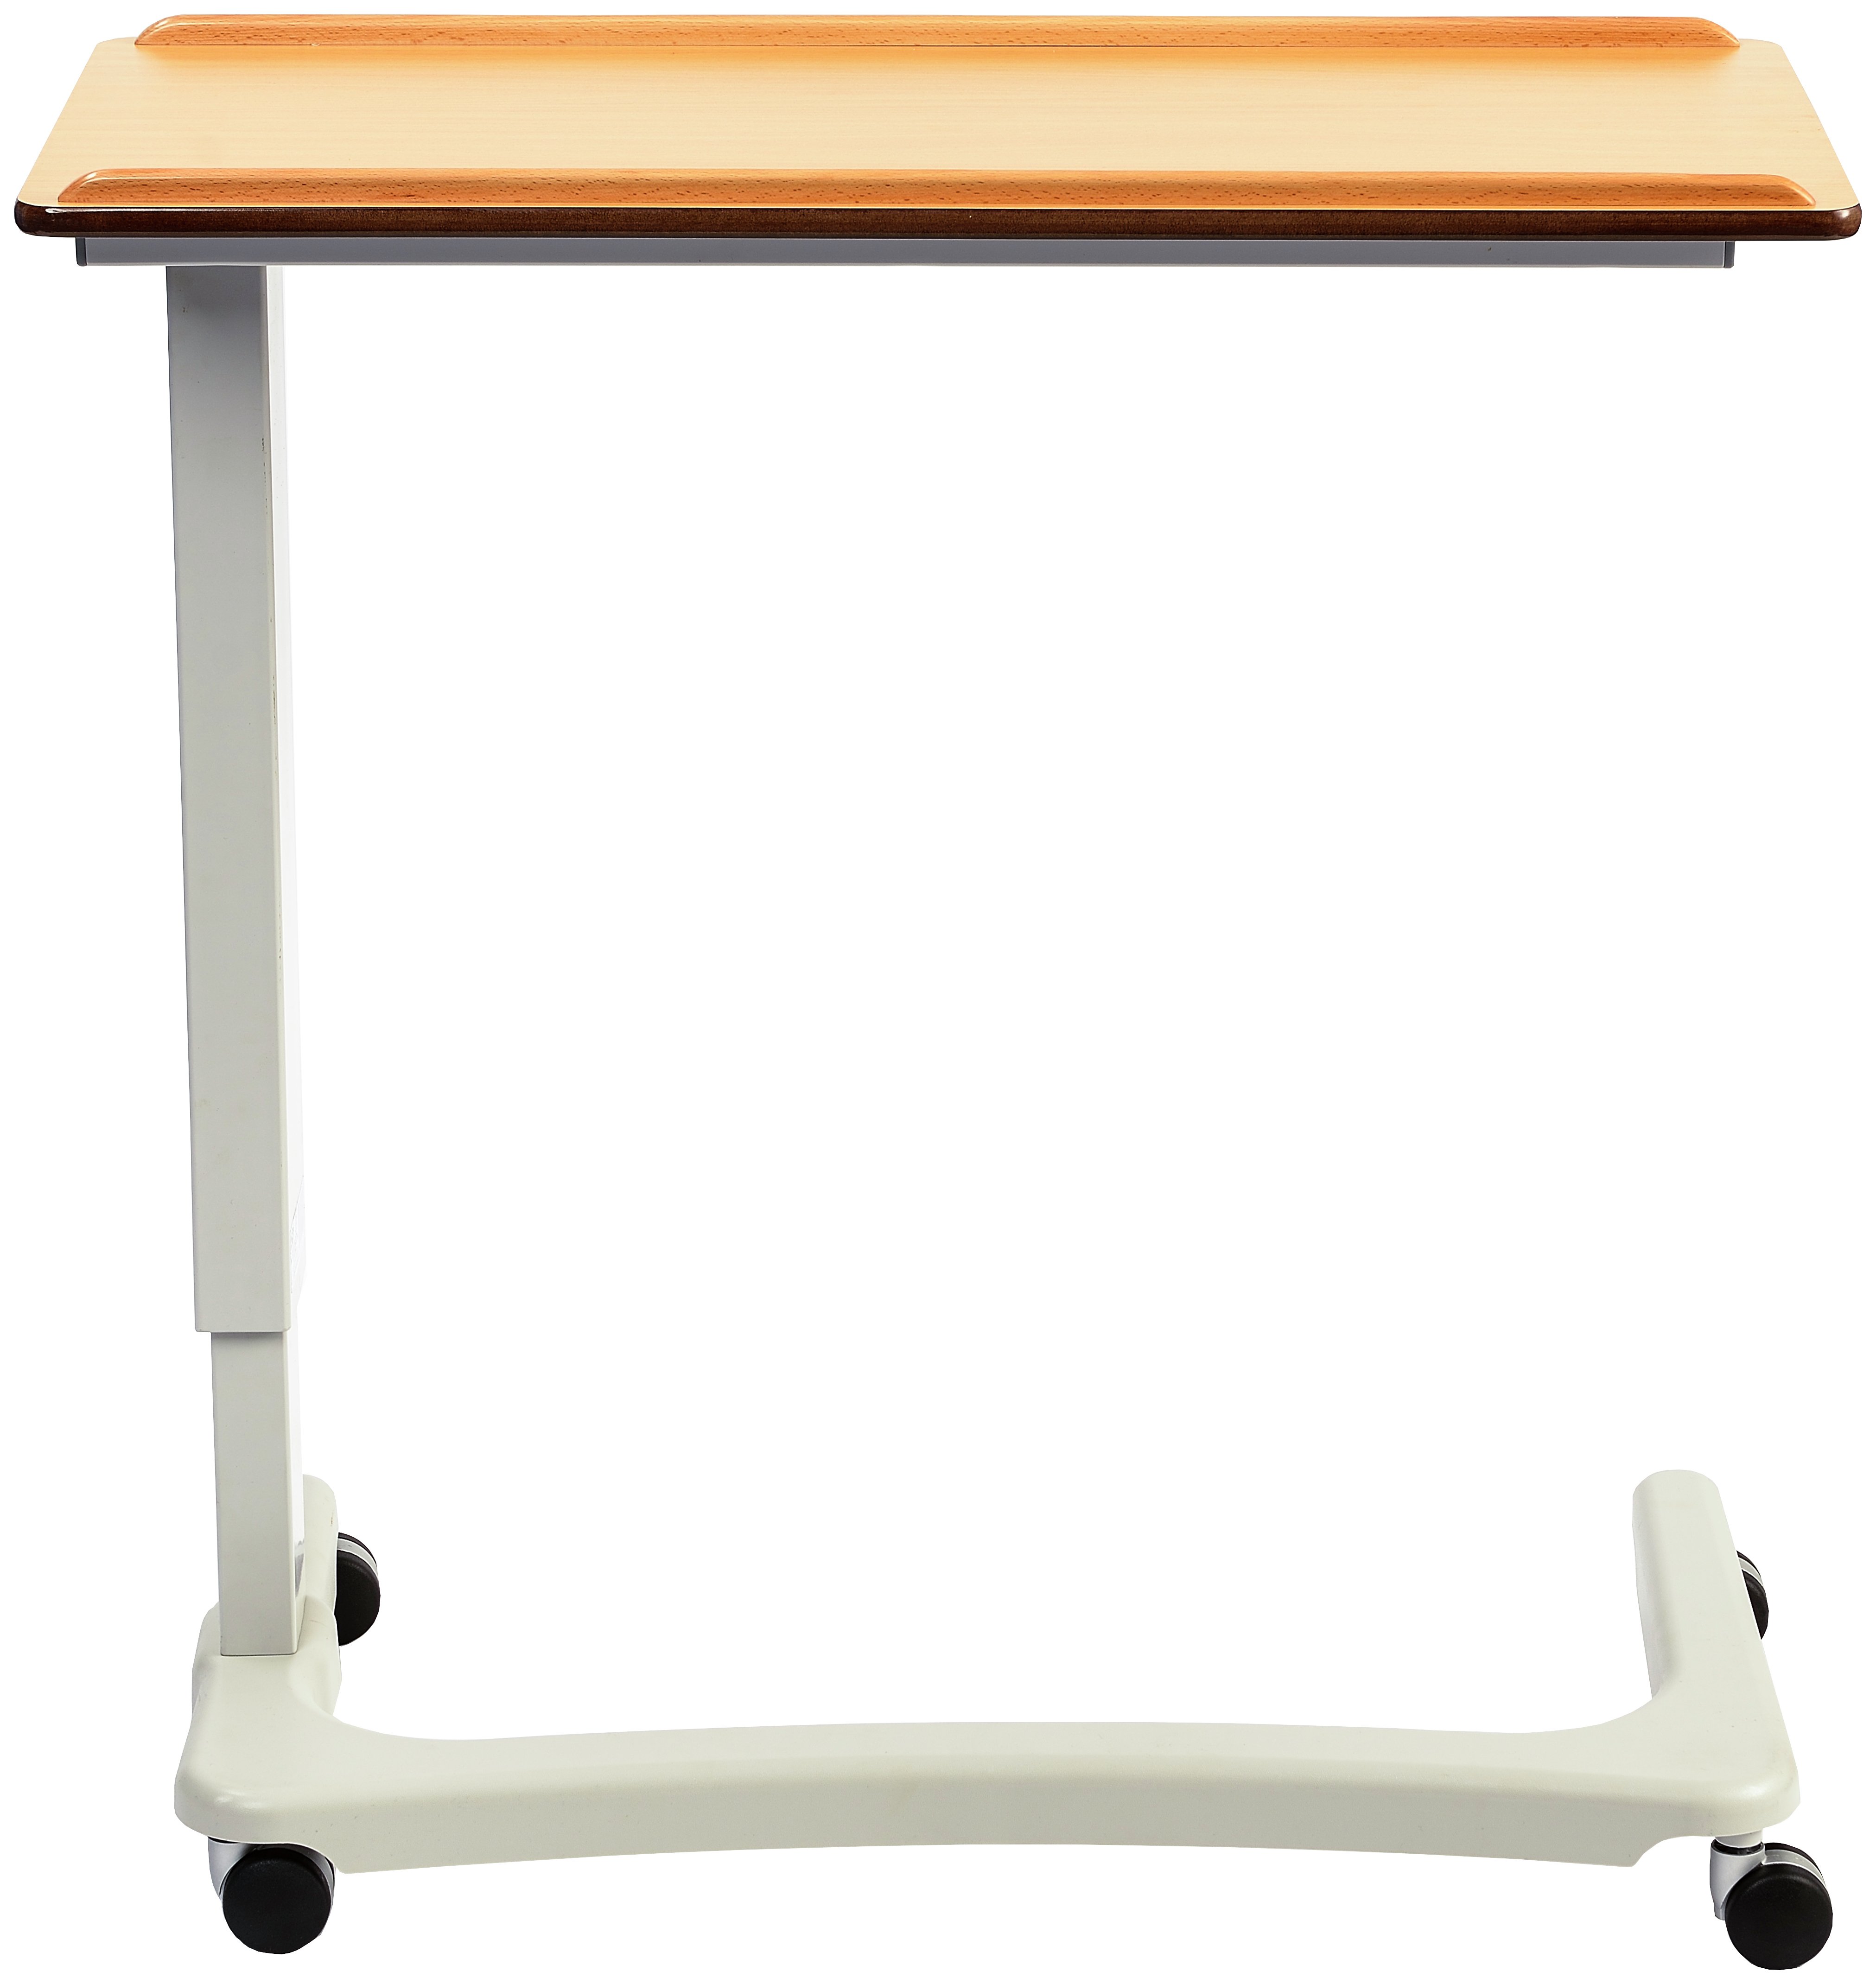 NRS Assisted Lift Overbed Table Base Cover